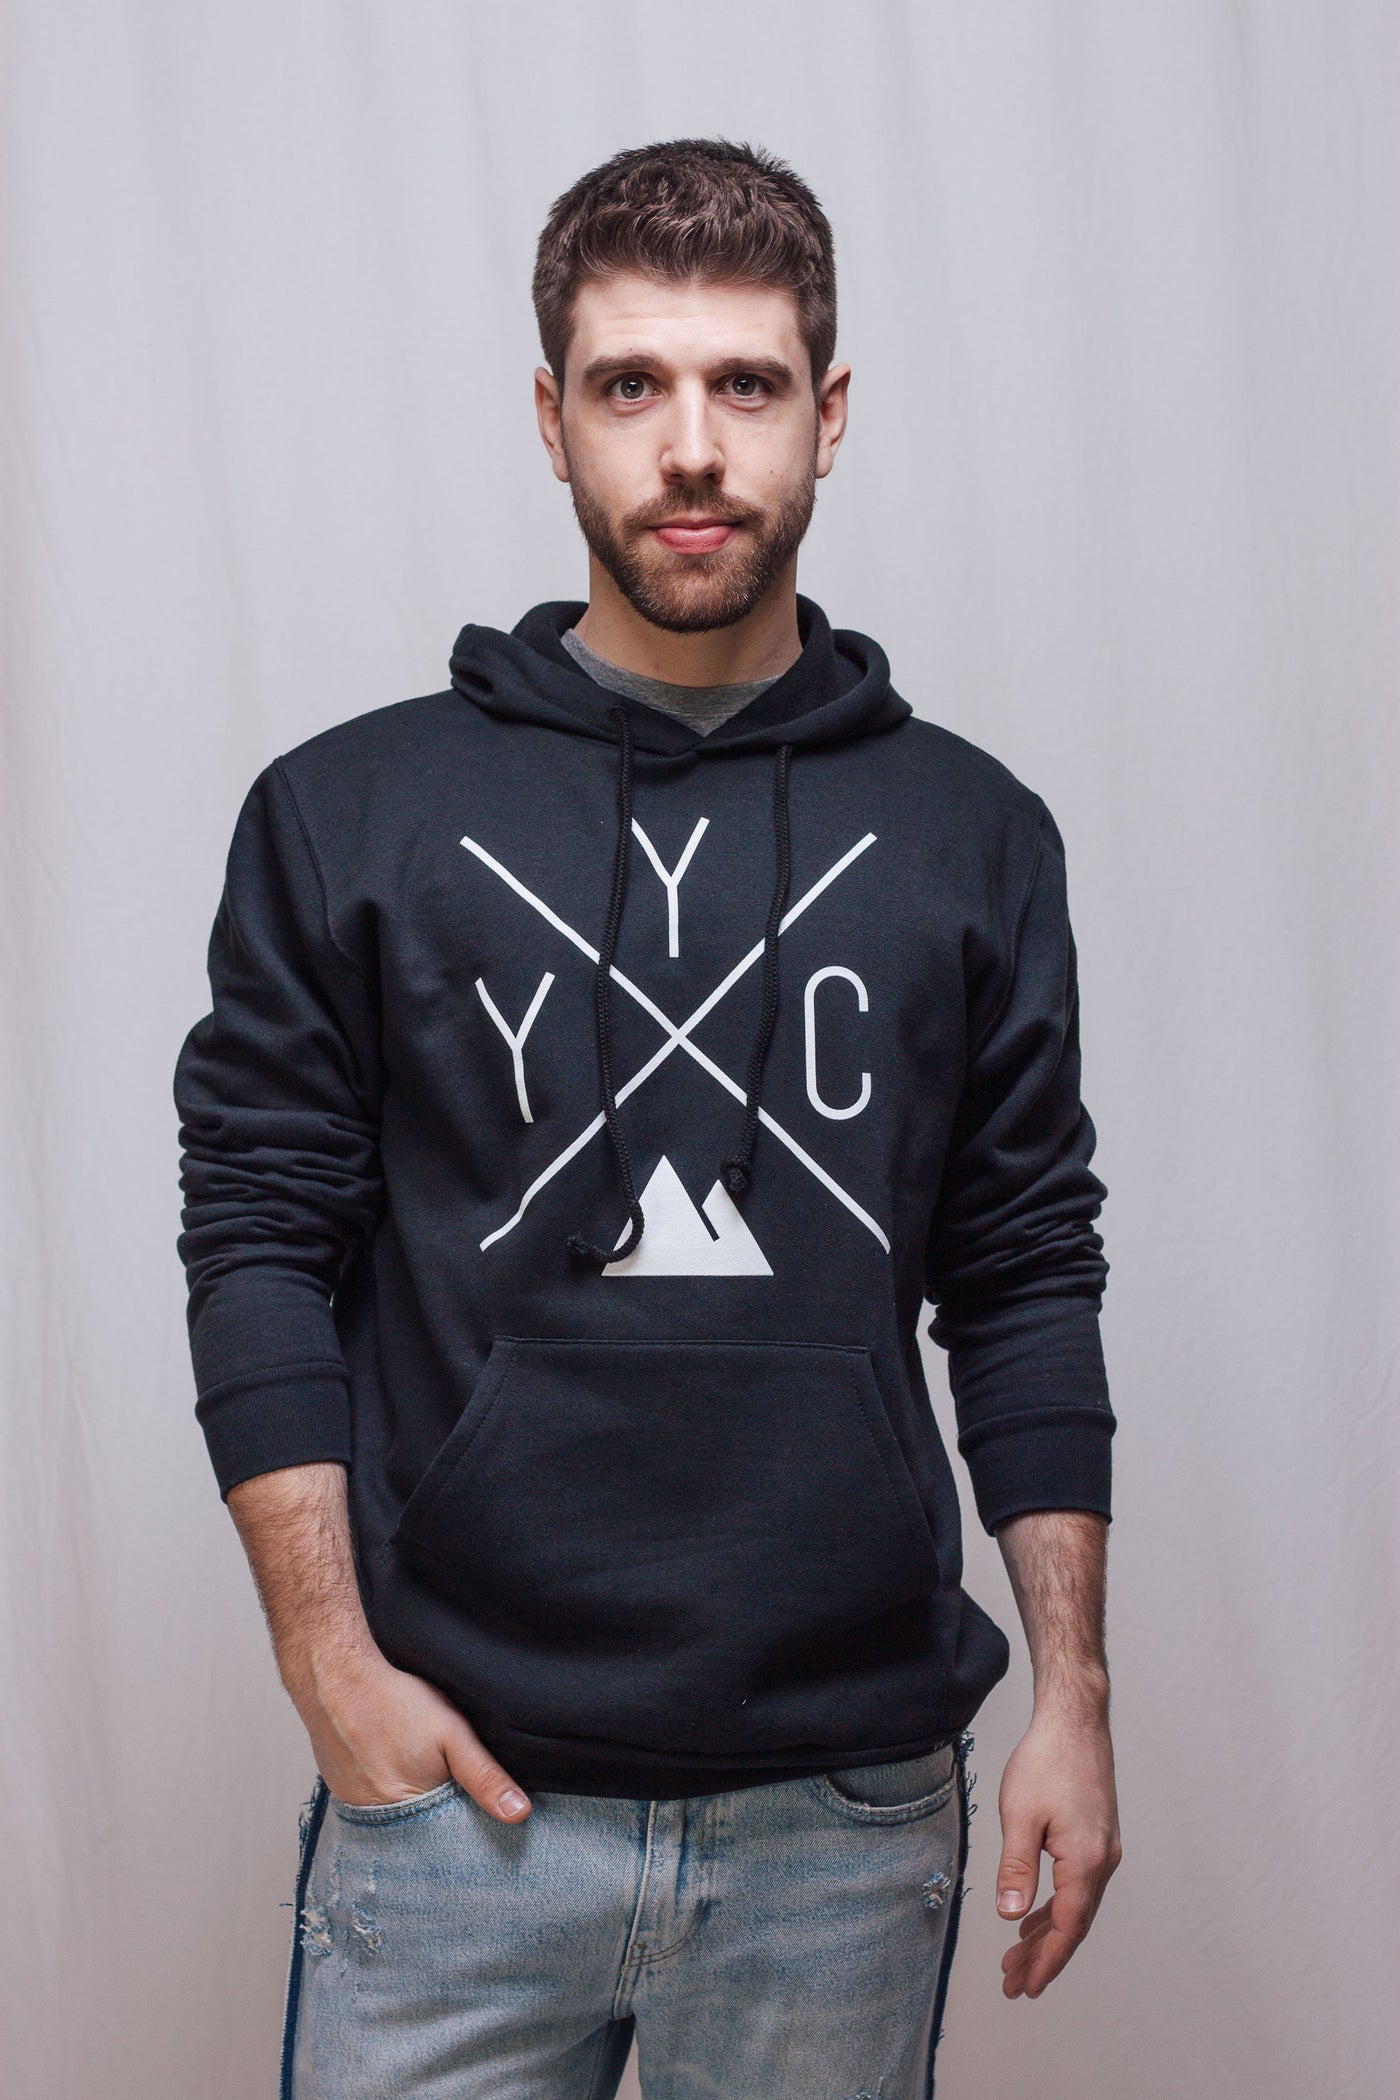 Individual wearing the Local Laundry YYC Hoodie in black, featuring a white YYC graphic trademarked by Local Laundry. Individual is wearing this hoodie with a pair of blue denim. Sustainably made in Canada, represents supporting local economies.